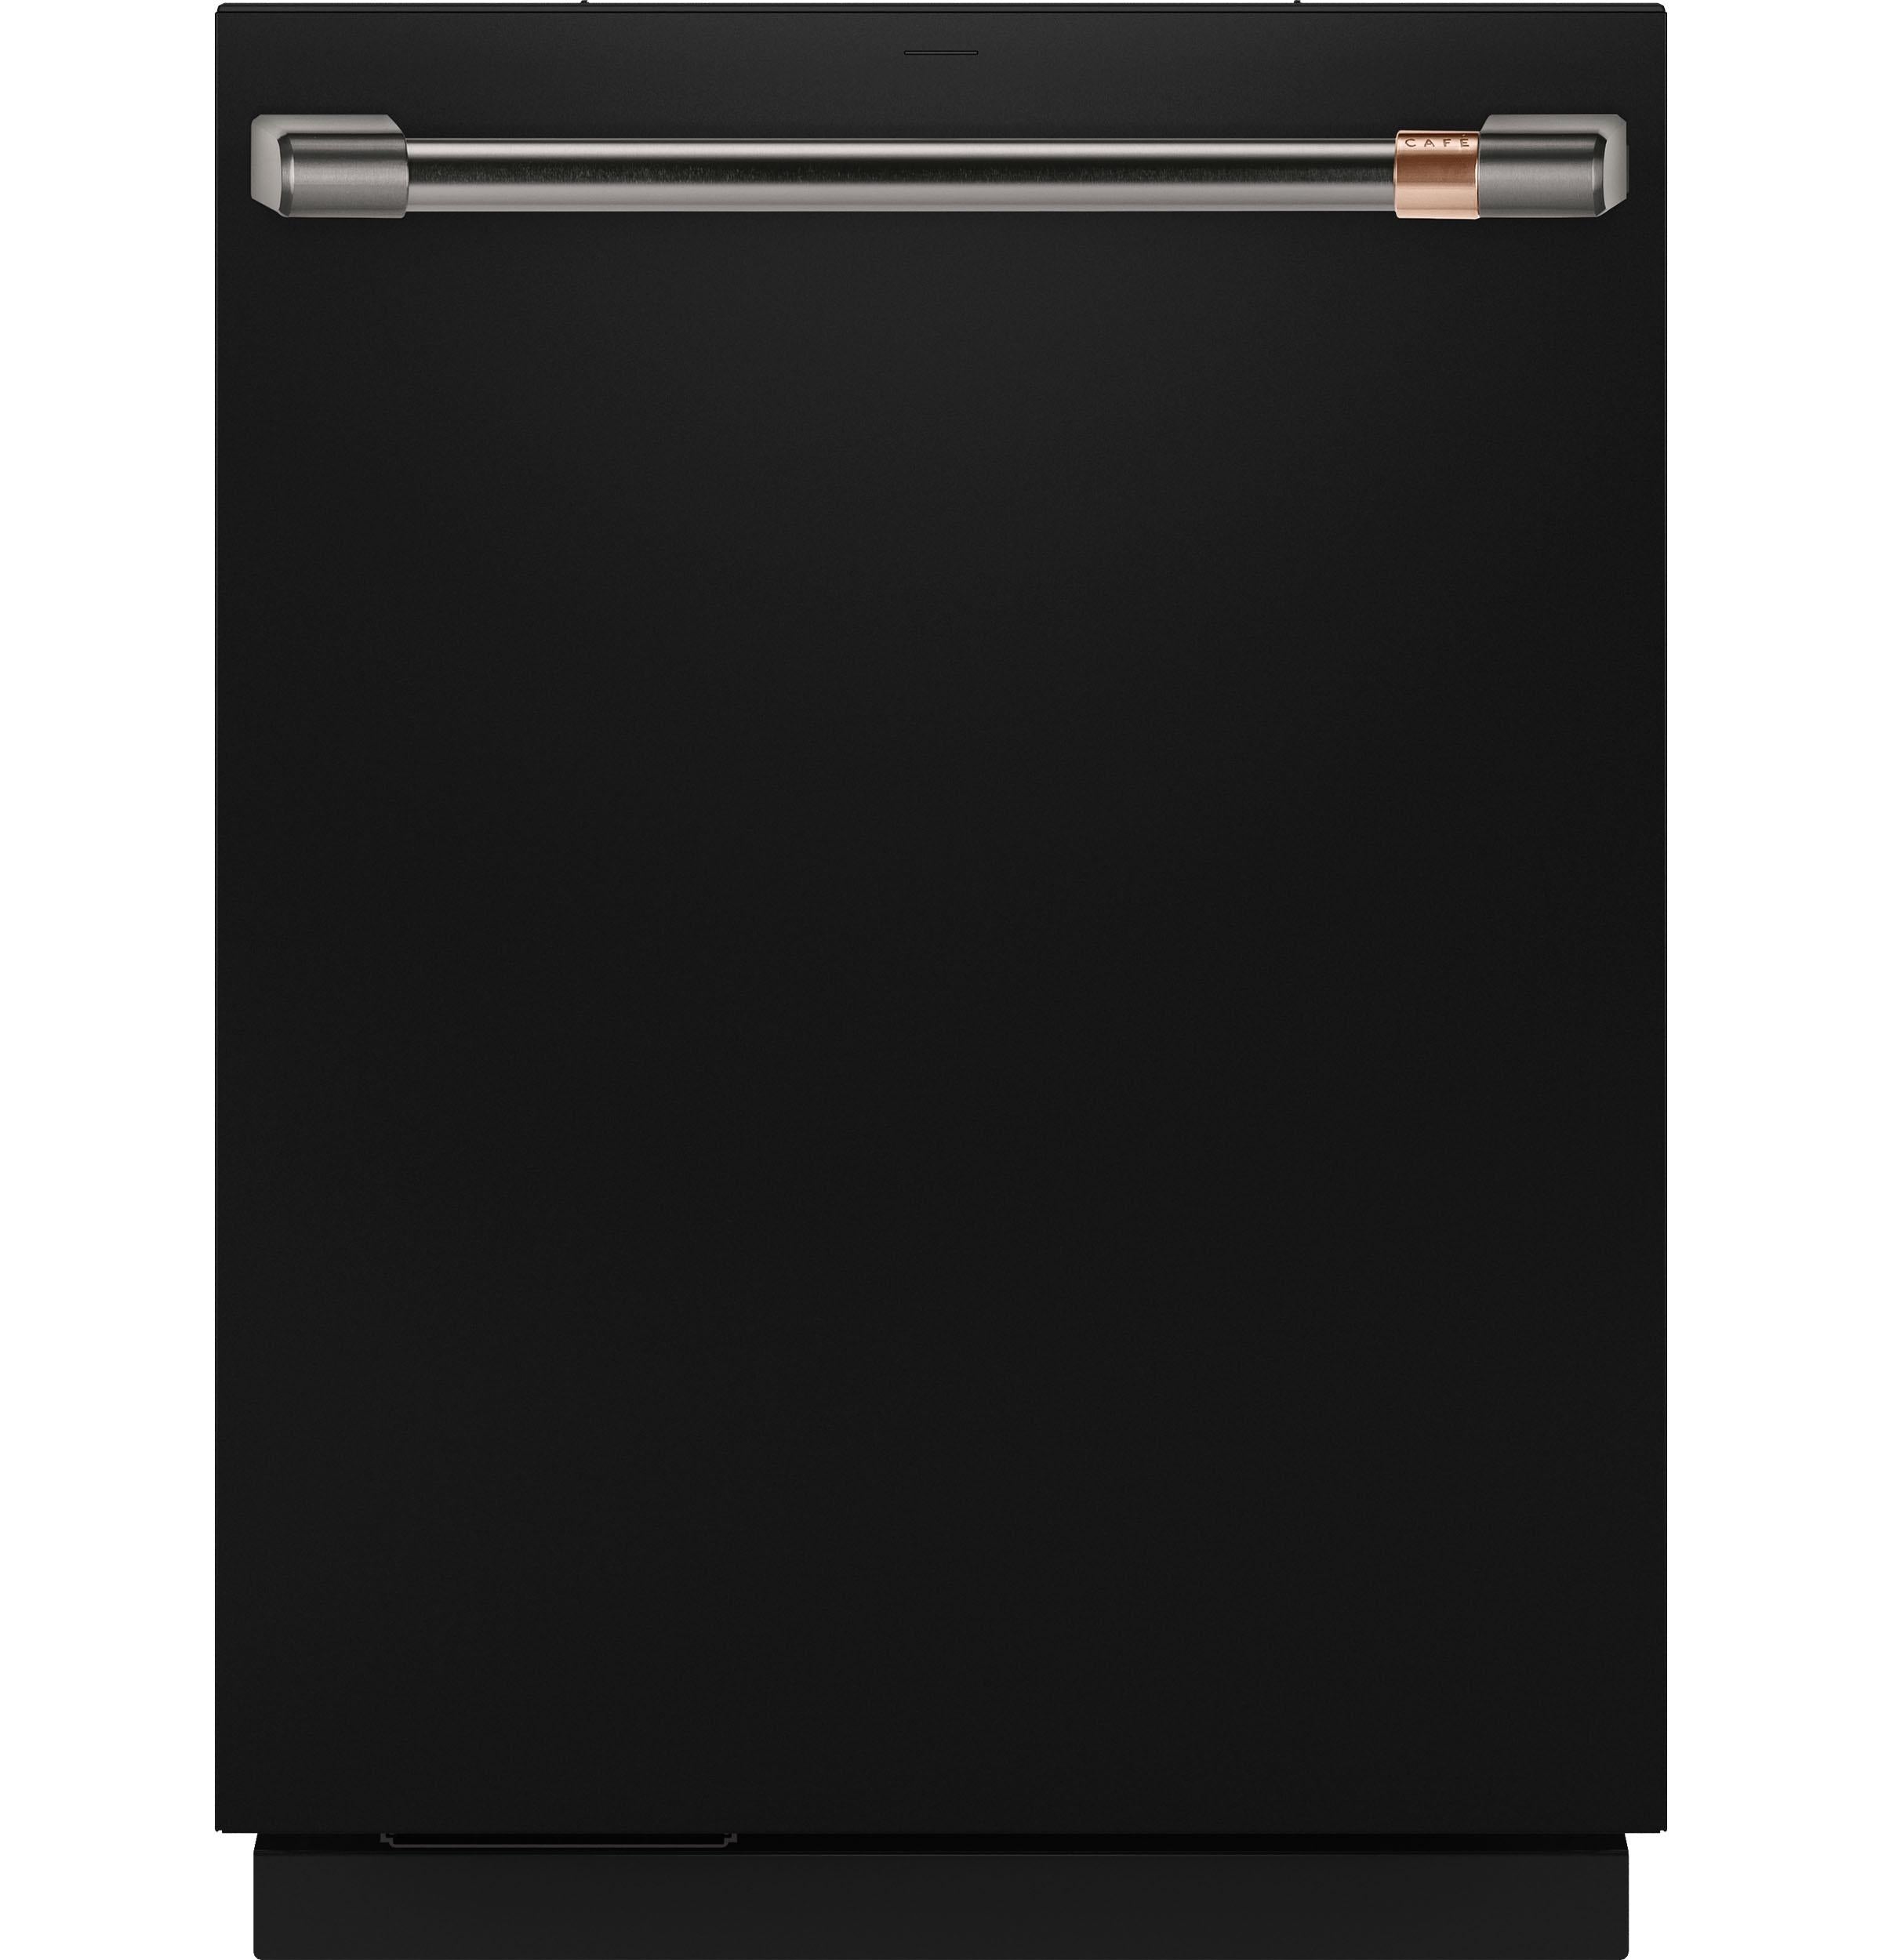 Cafe Caf(eback)™ CustomFit ENERGY STAR Stainless Interior Smart Dishwasher with Ultra Wash Top Rack and Dual Convection Ultra Dry, 44 dBA